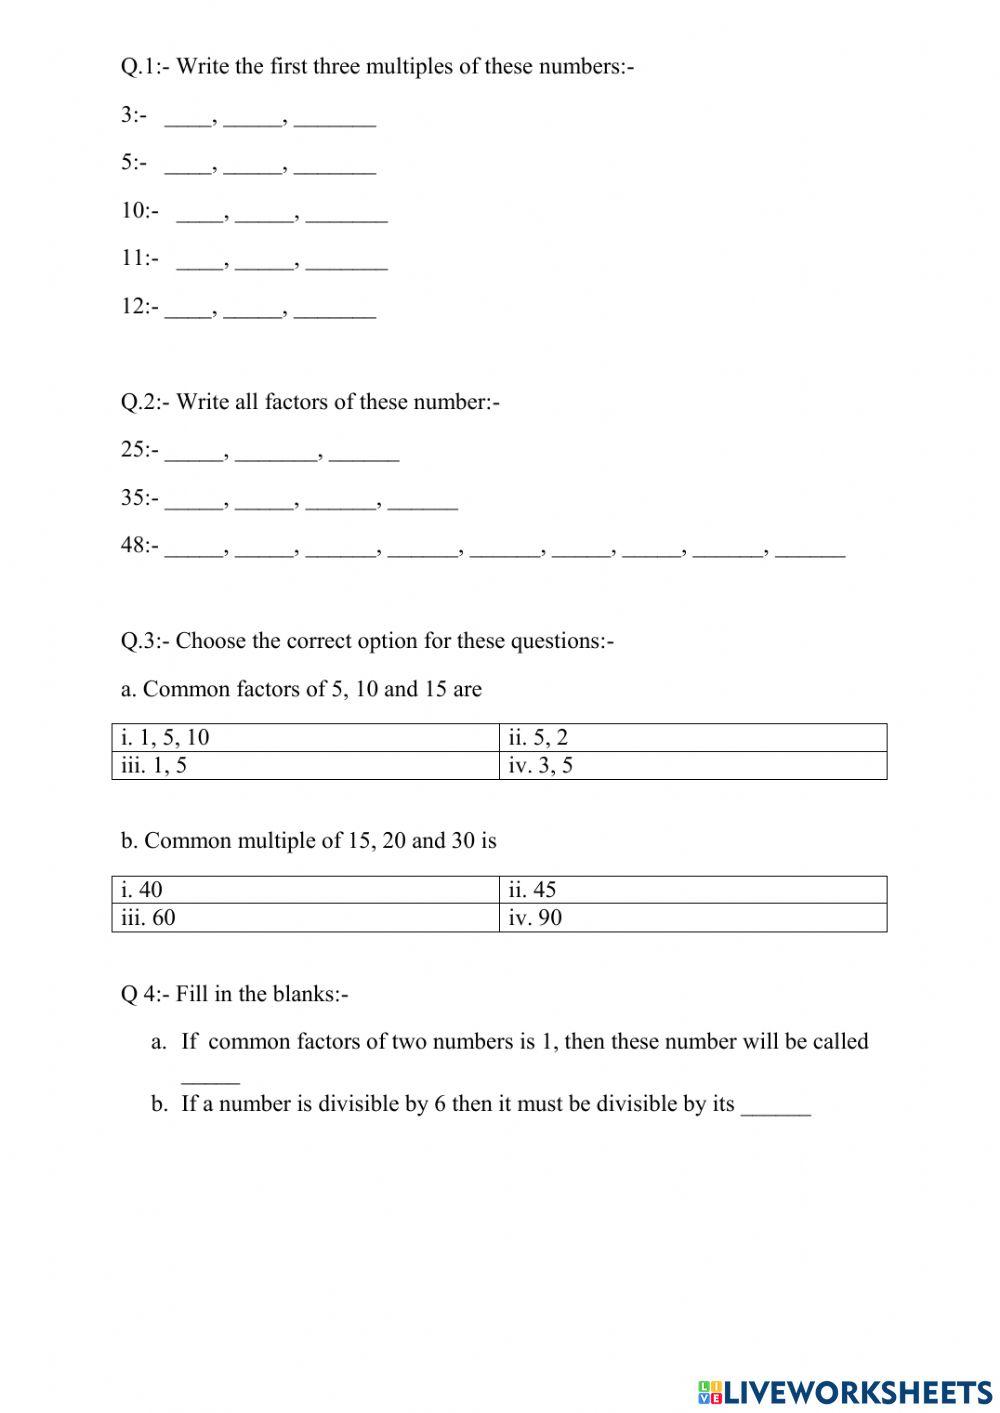 Worksheet - Playing with numbers